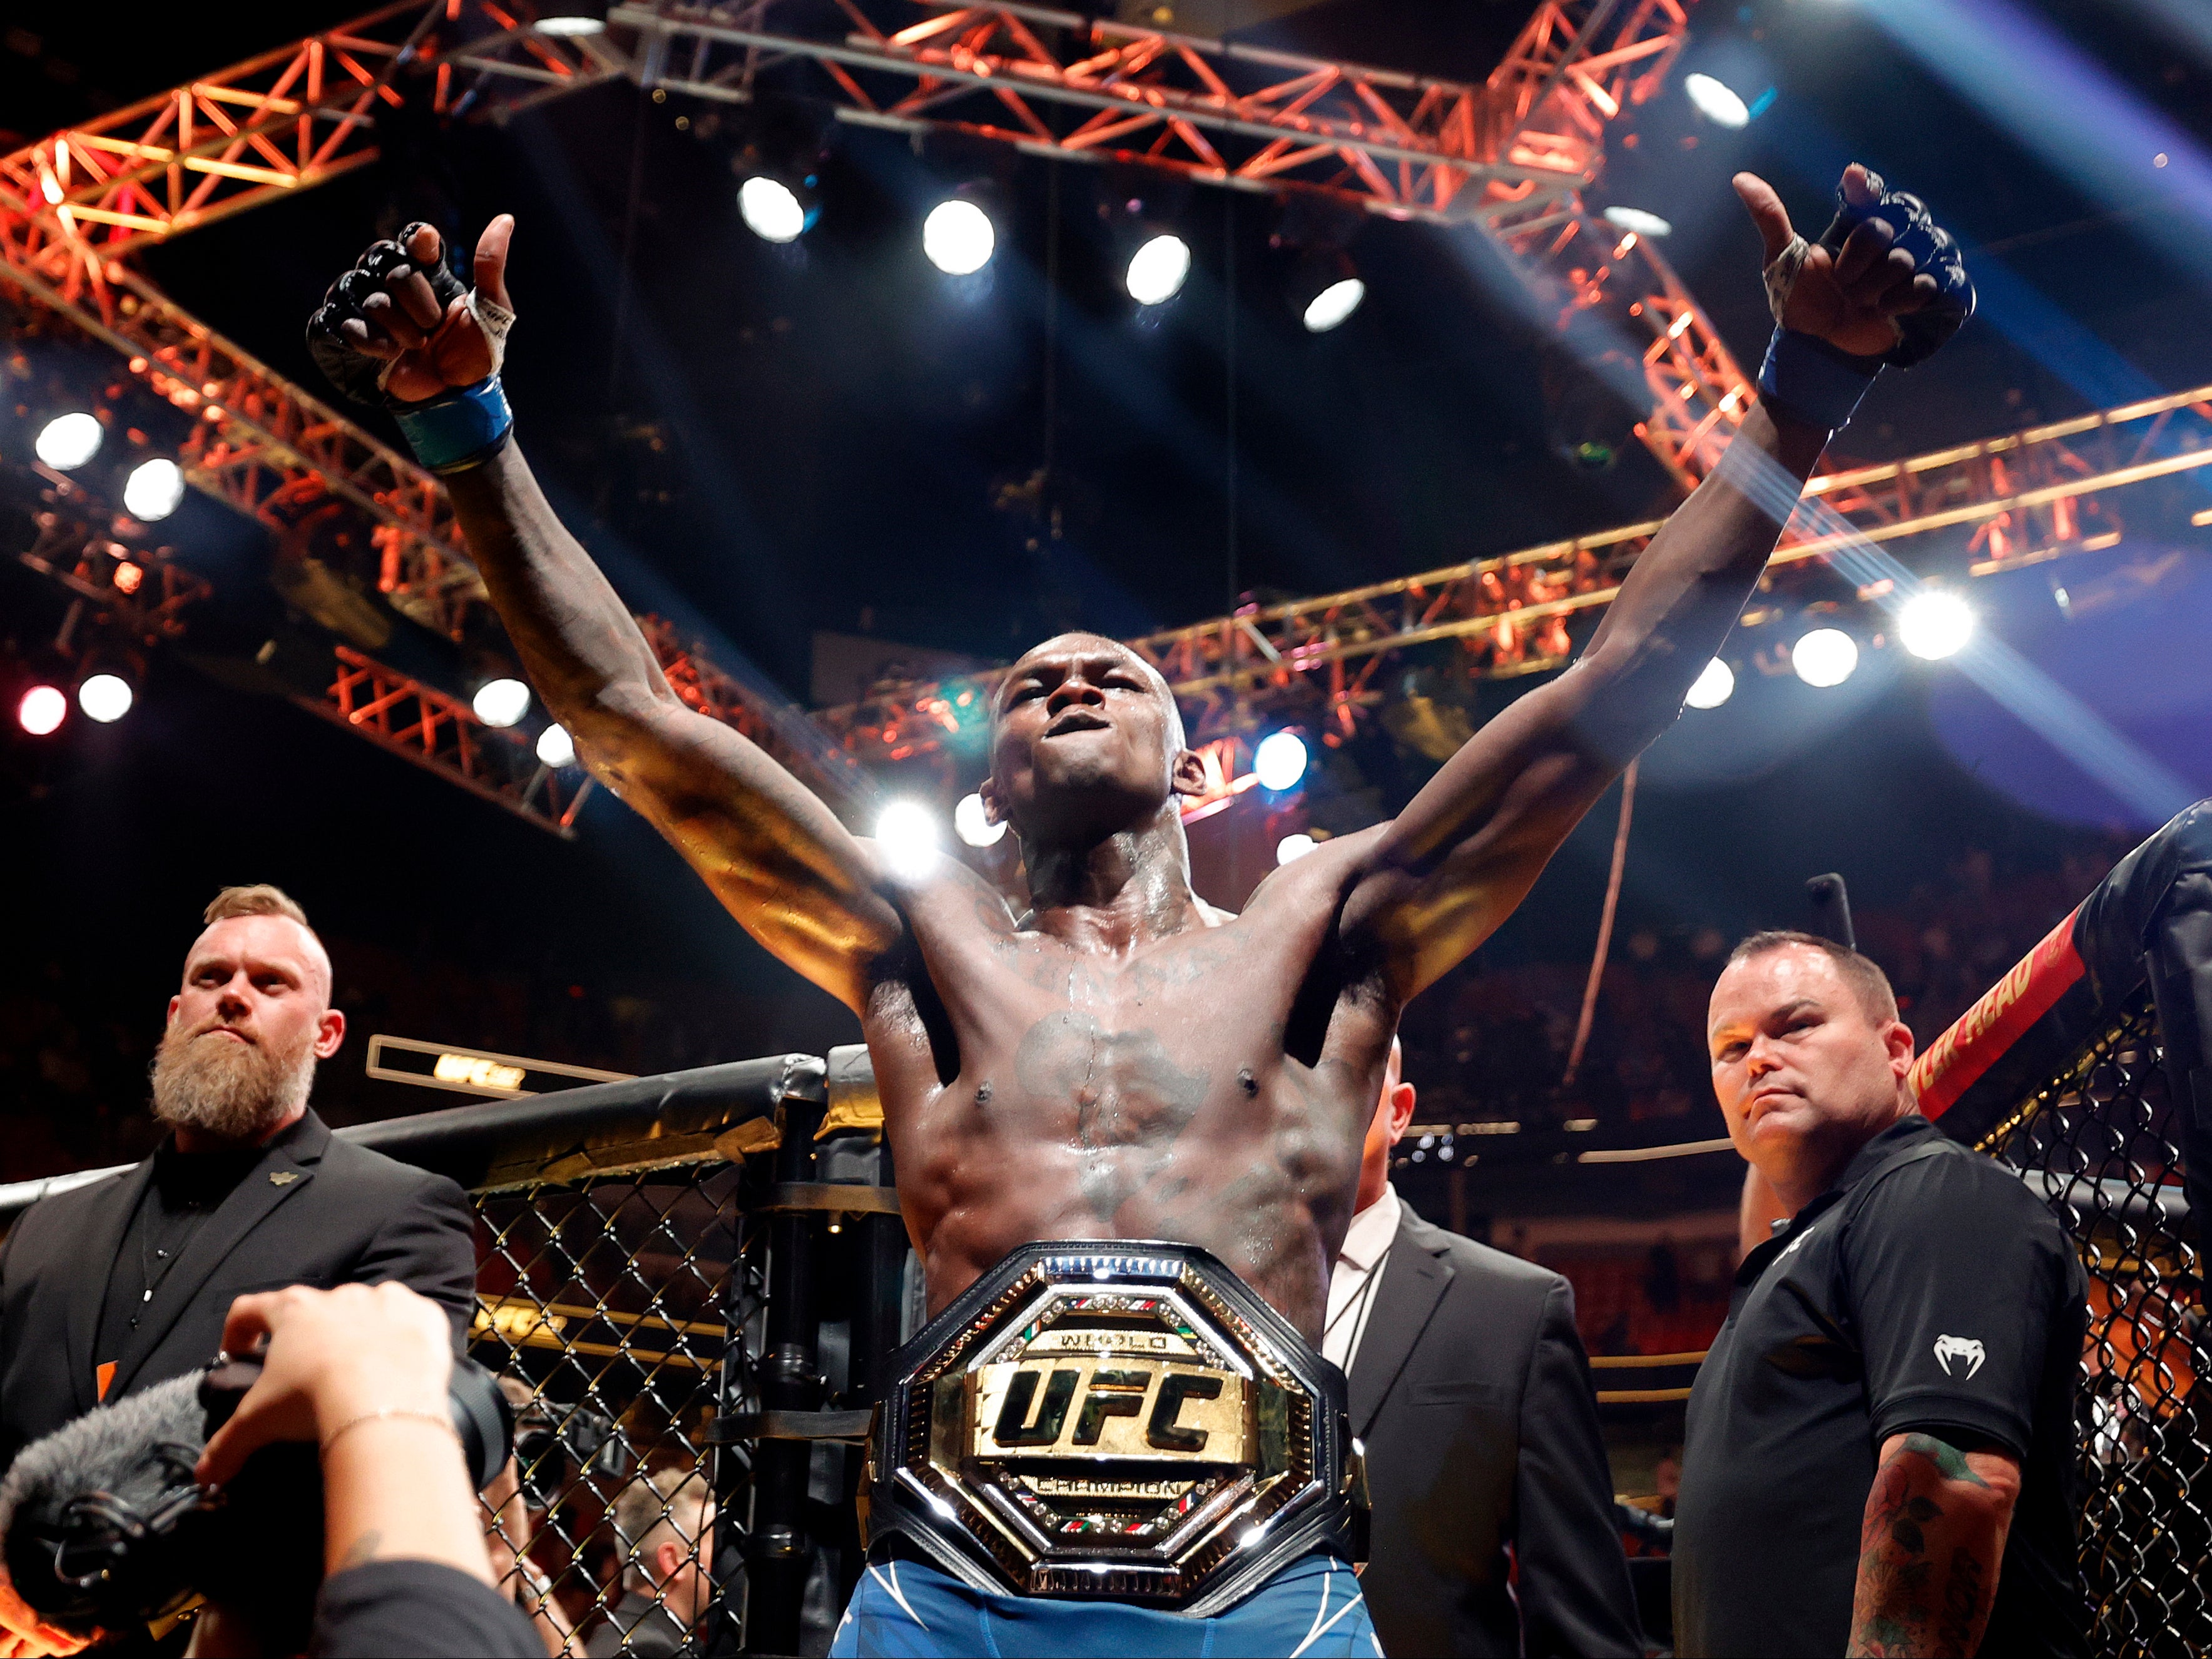 Adesanya regained the UFC middleweight title with his win over Pereira